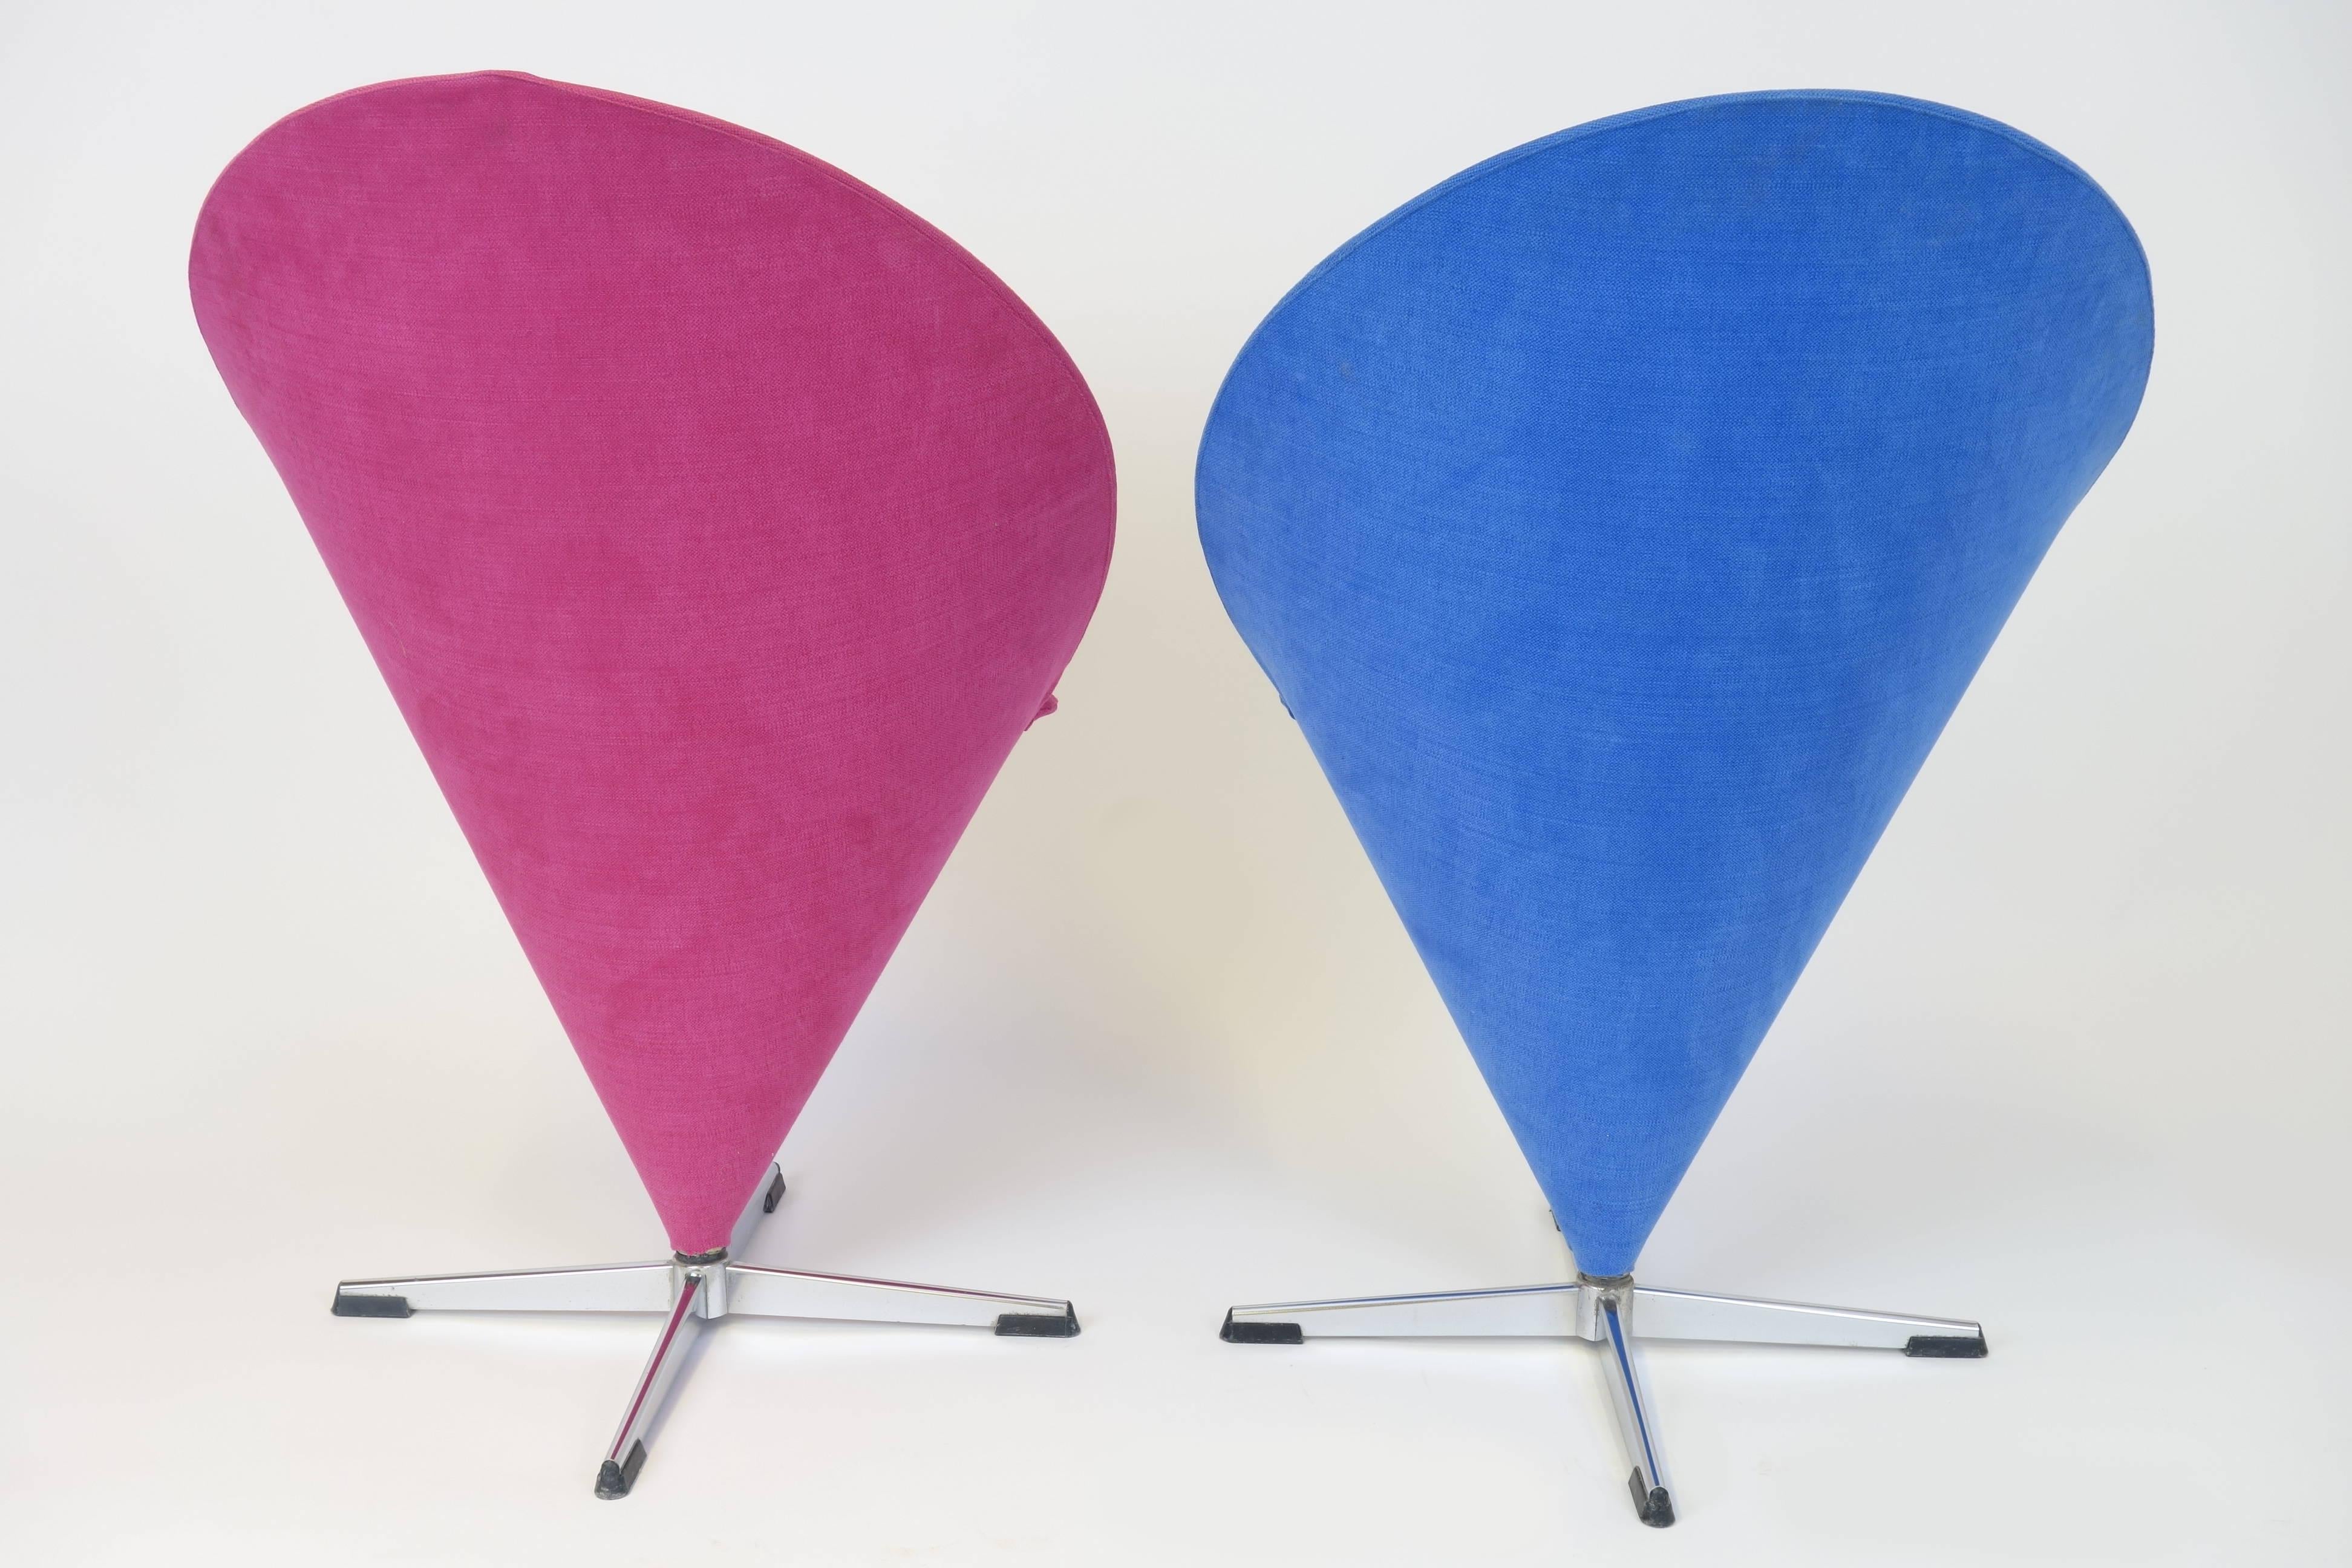 Danish Original K1 Cone Chairs Design Blue Red by Verner Panton, Denmark, 1950s For Sale